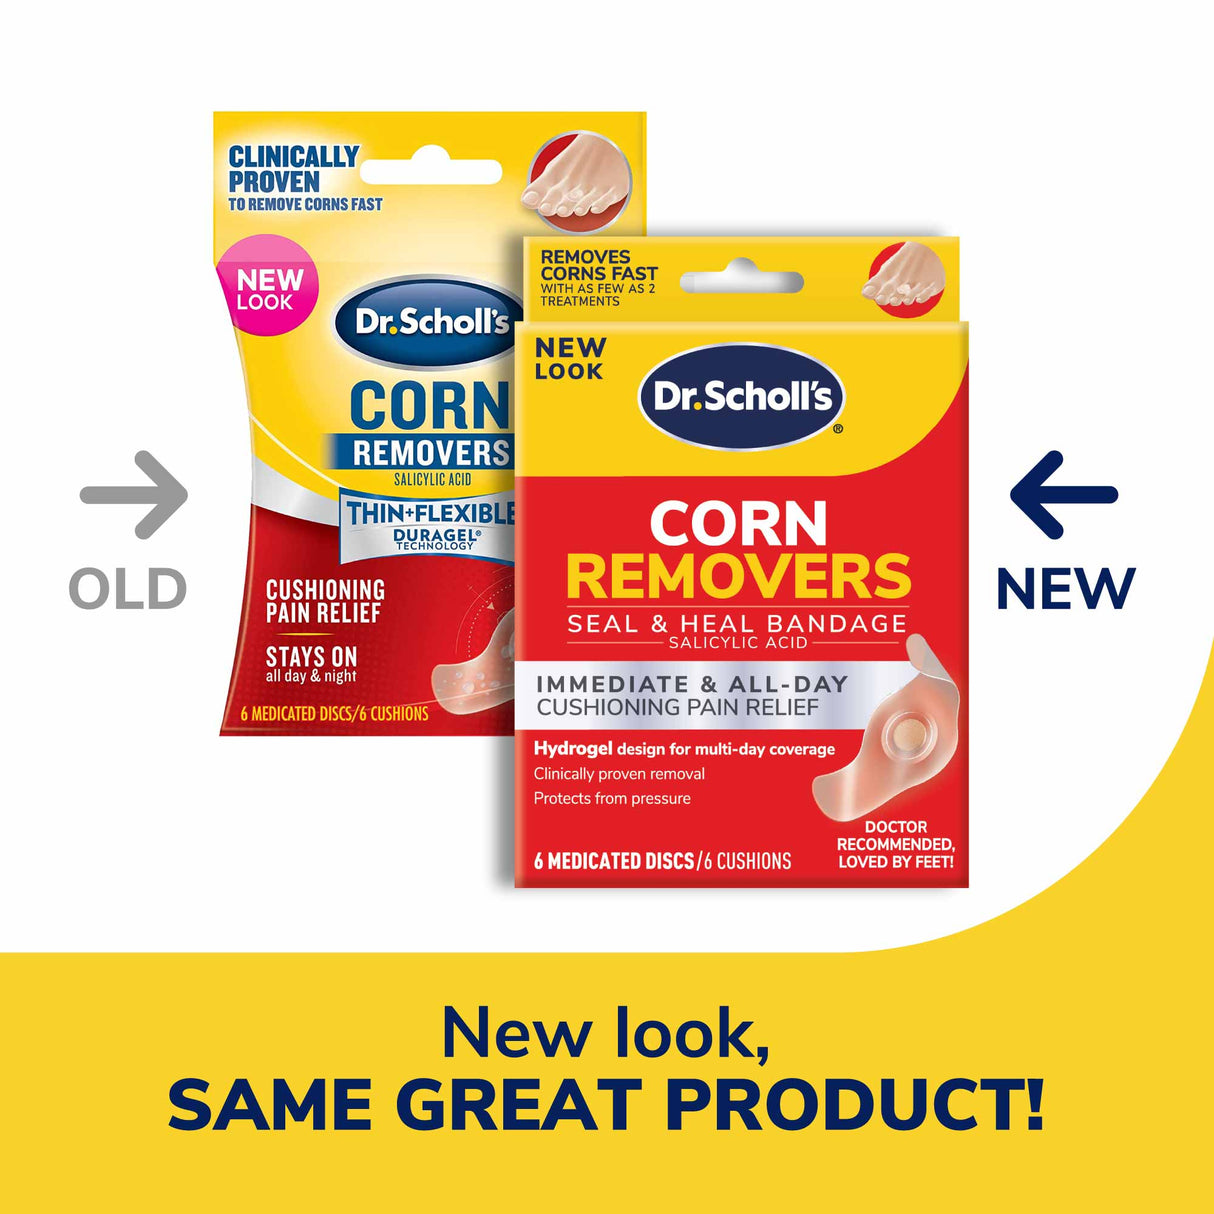 image of old packaging and new packaging of corn removers